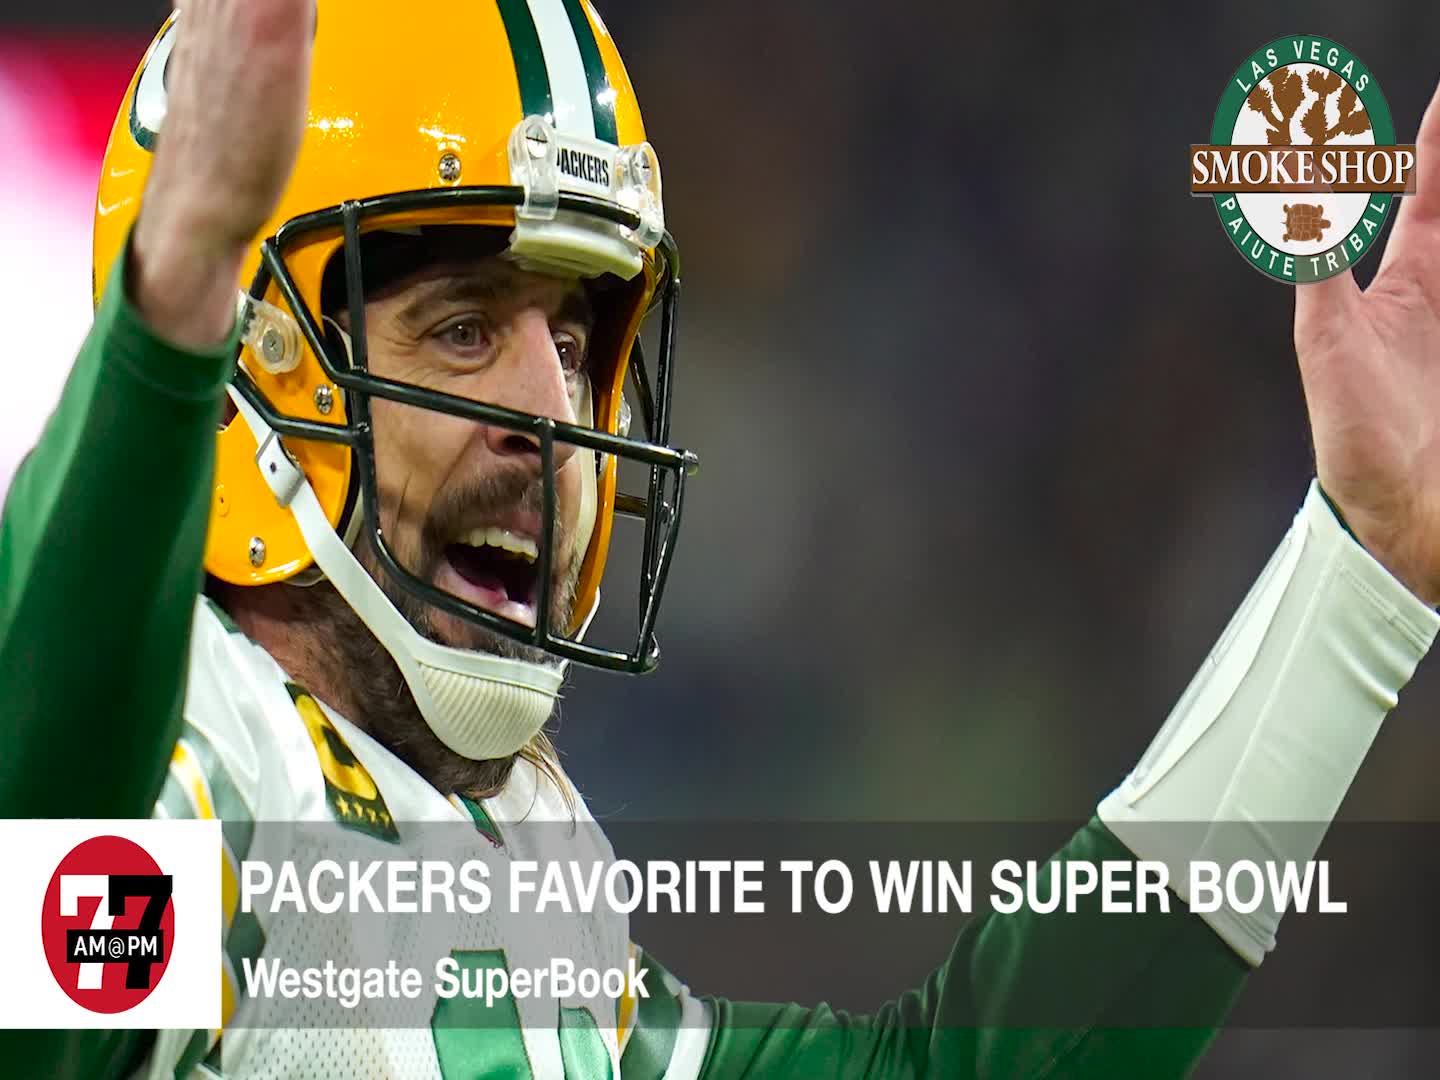 7@7PM Packers Favorite to Win Super Bowl